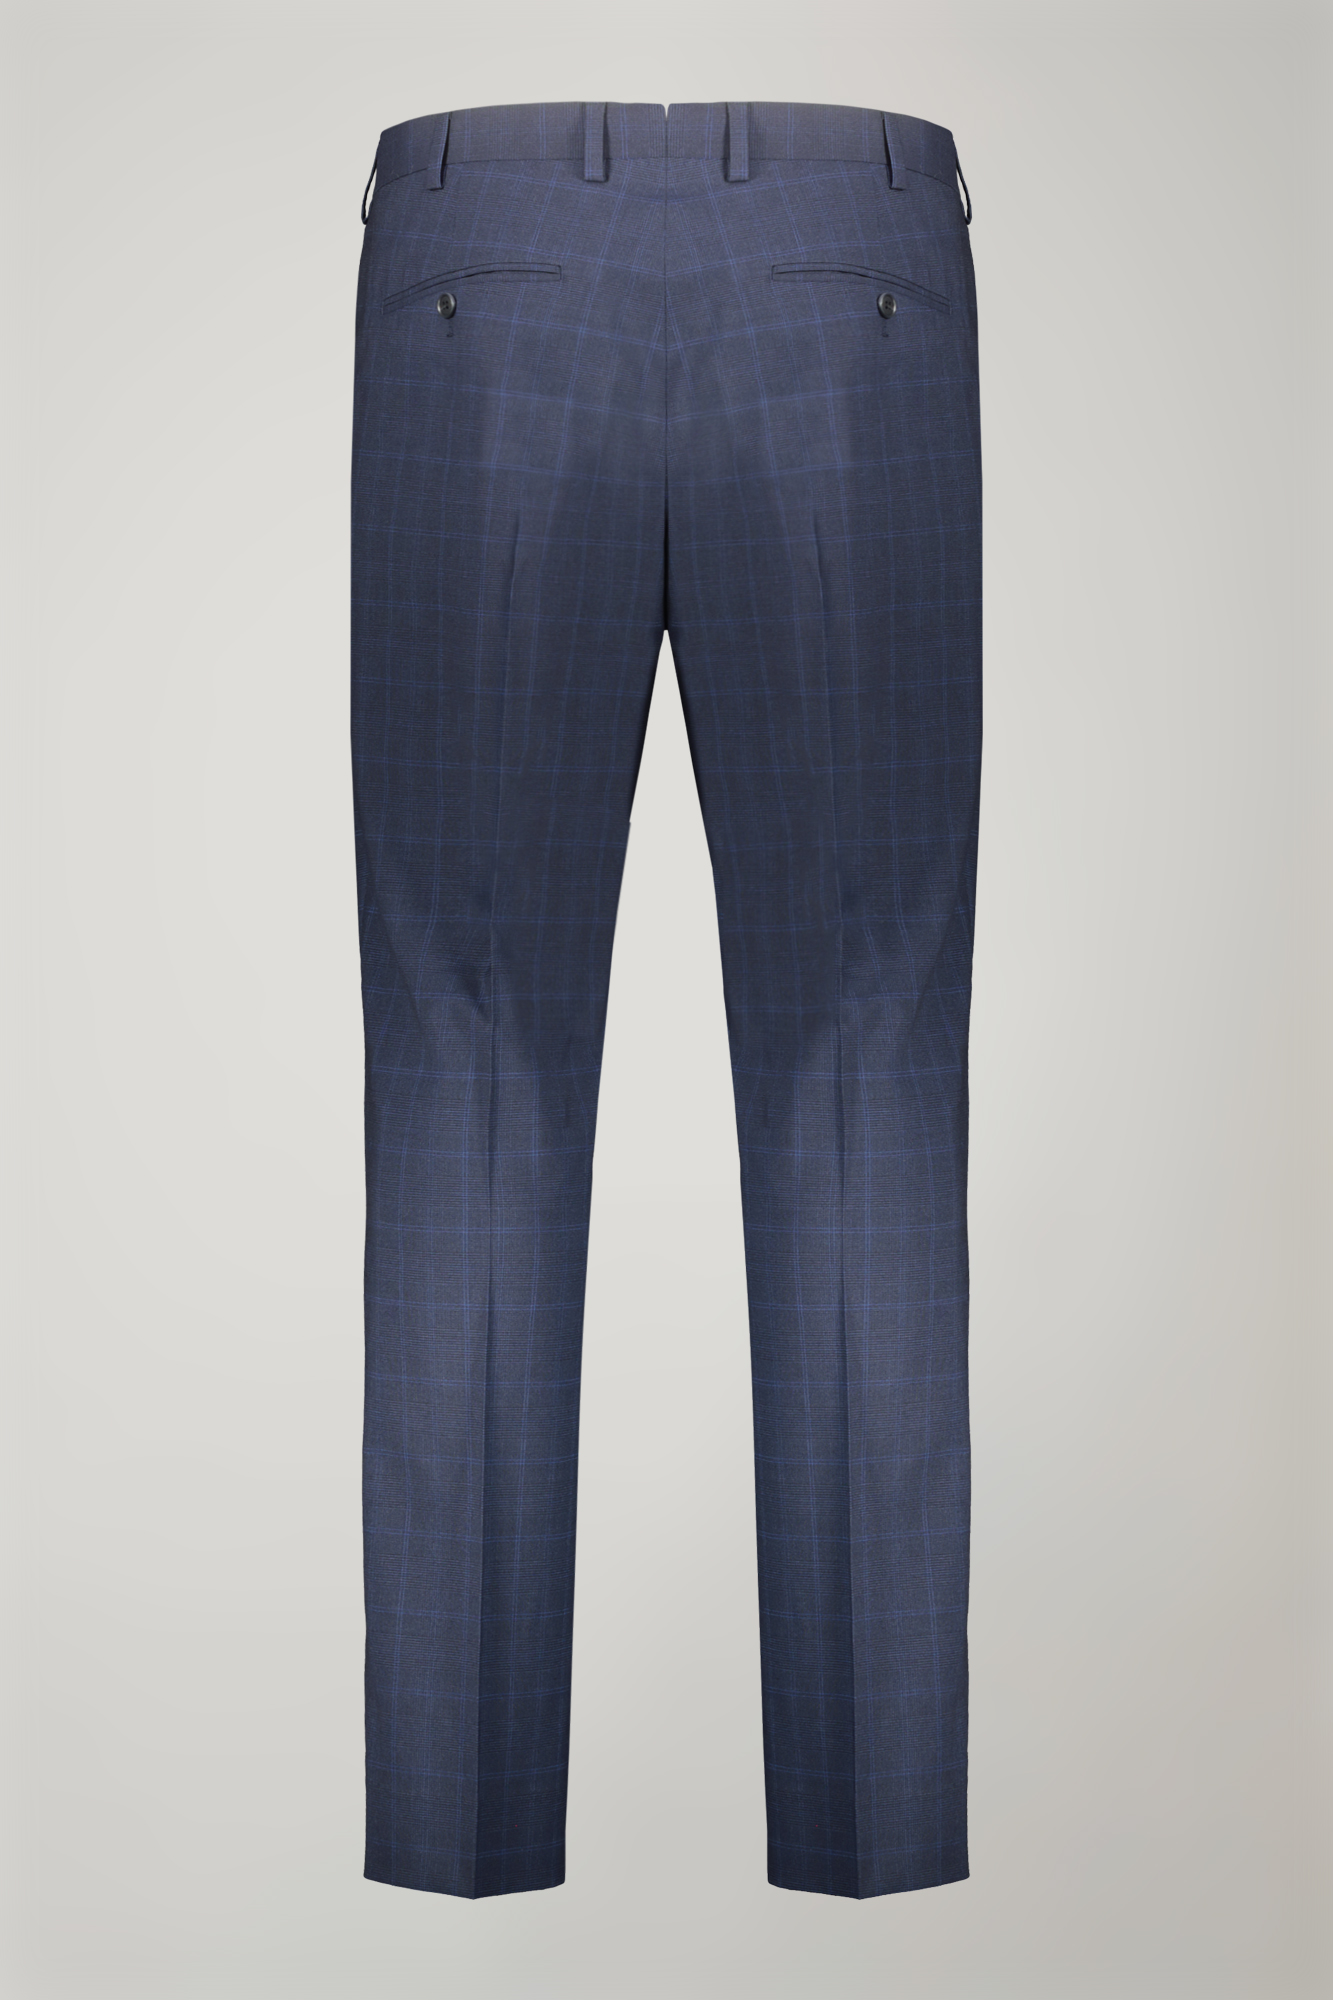 Men's single-breasted suit Prince of Wales stretch fabric image number null